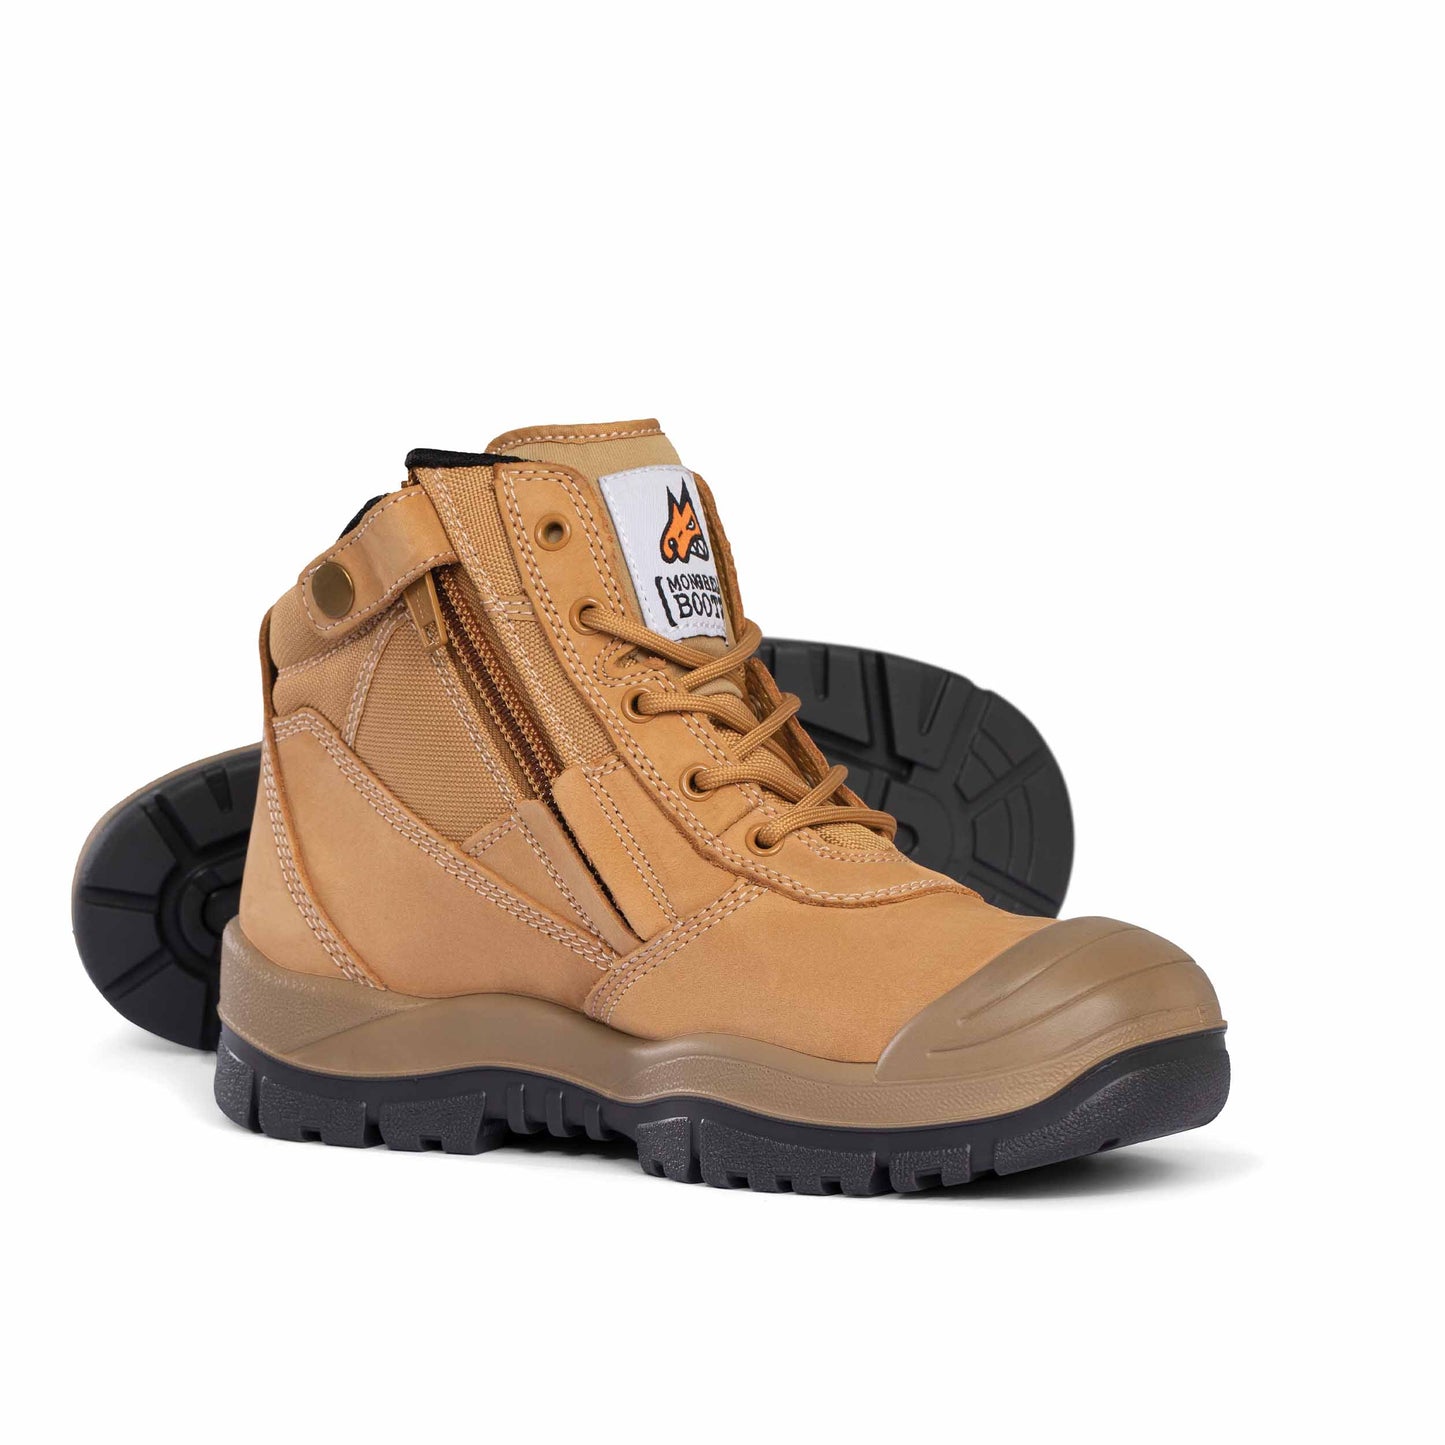 Zip Scuff Safety Boots - made by Mongrel